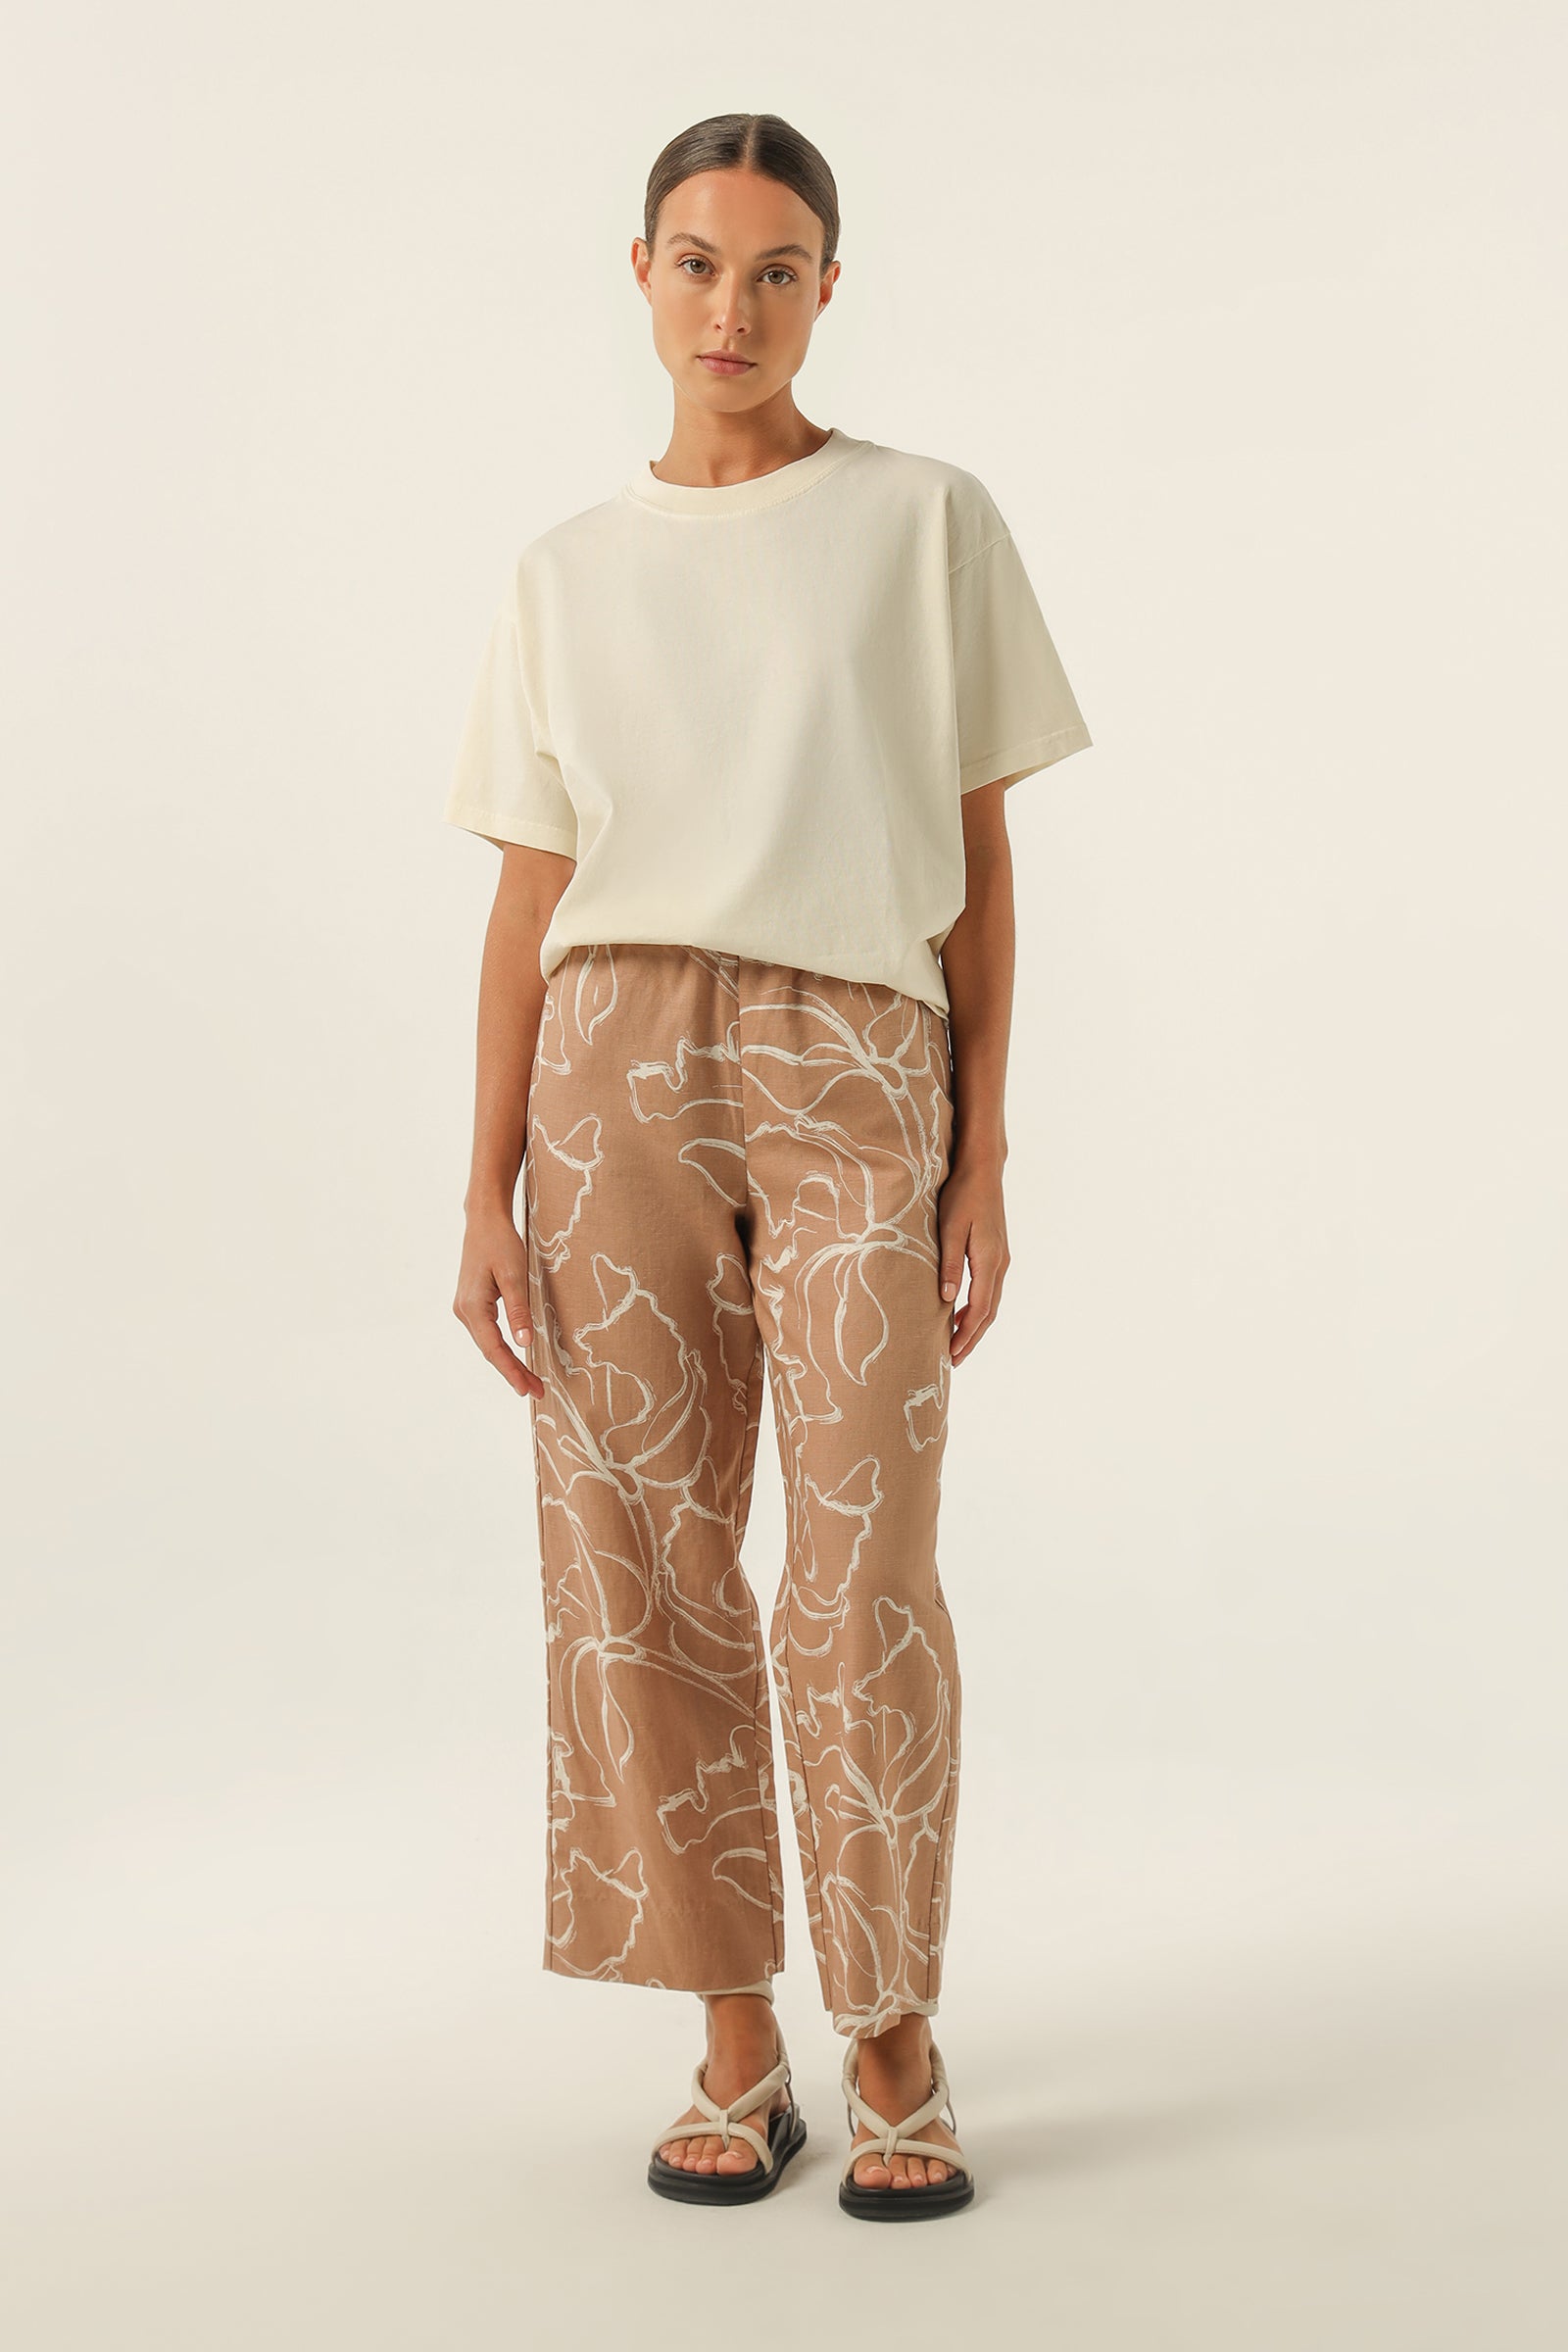 Nude Lucy Zion Pant Matisse  